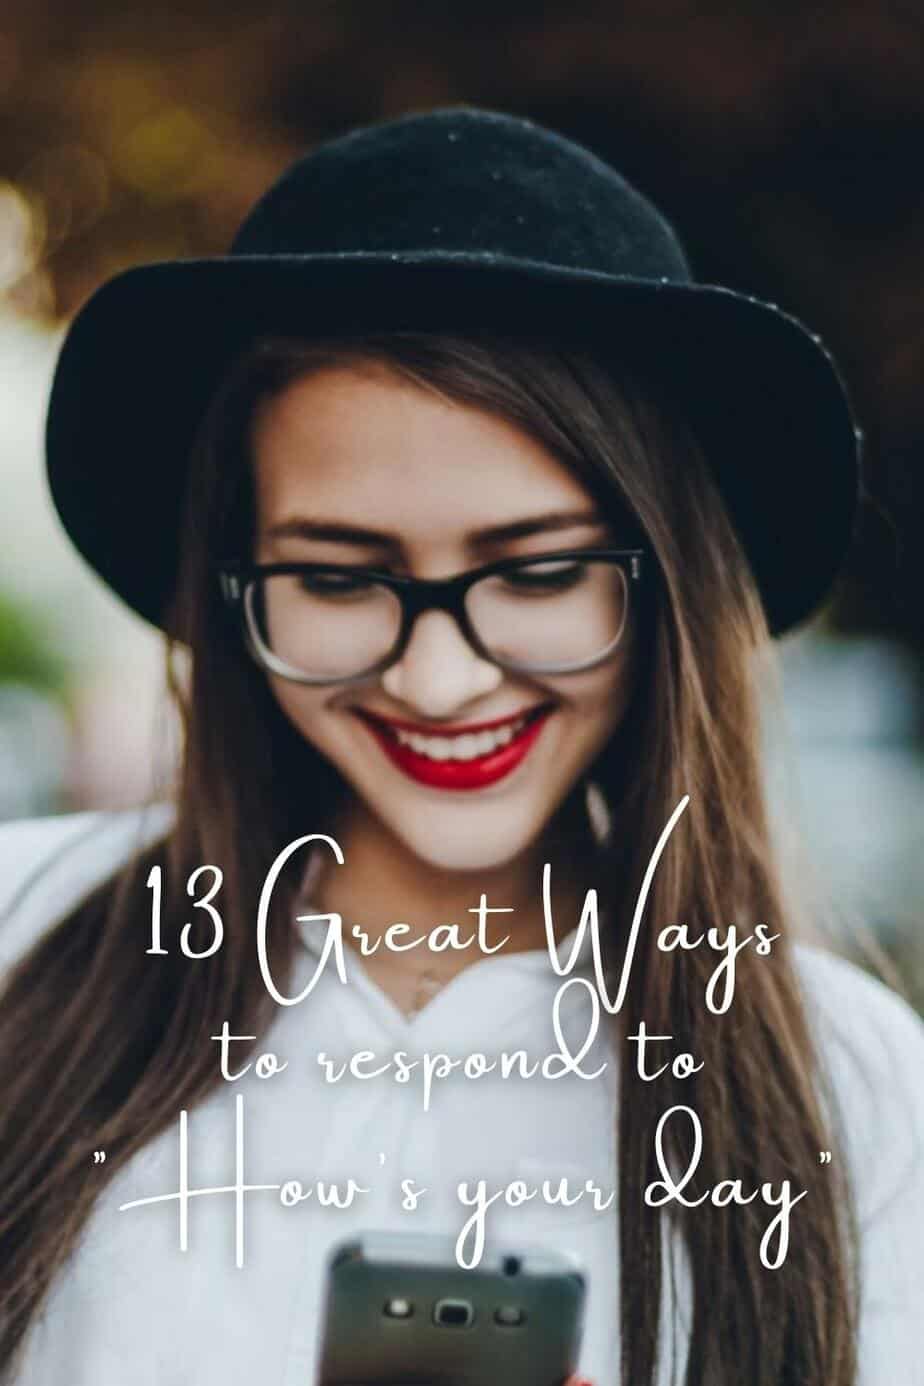 13 Great Ways to Respond to 